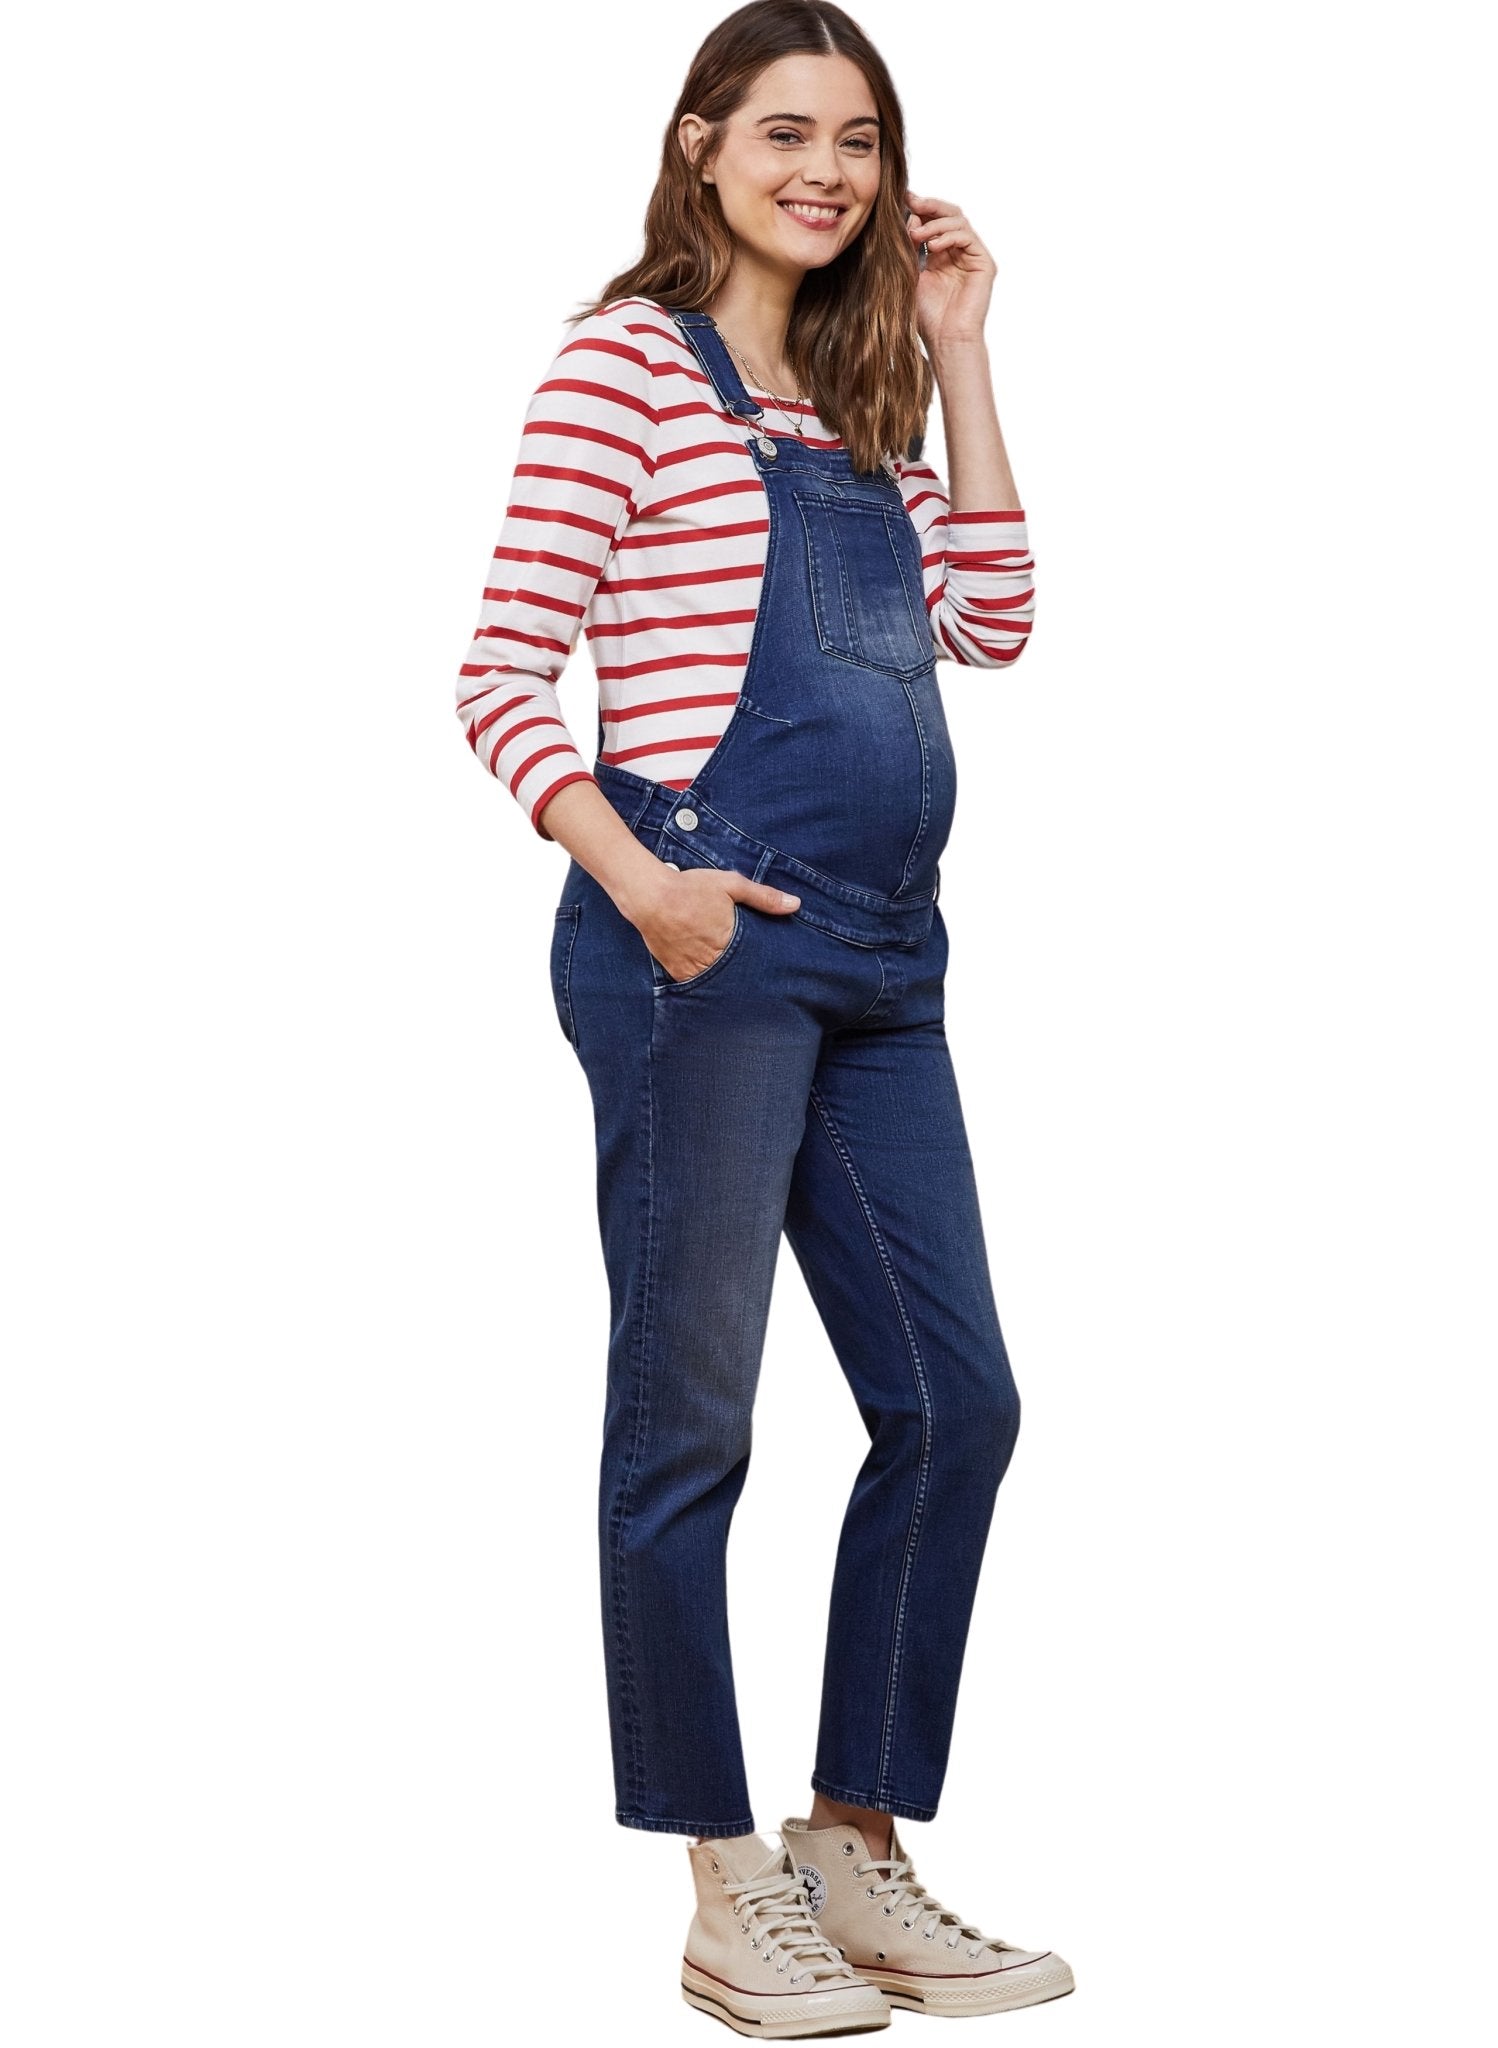 Gerrie Organic Maternity Dungarees - Mums and Bumps